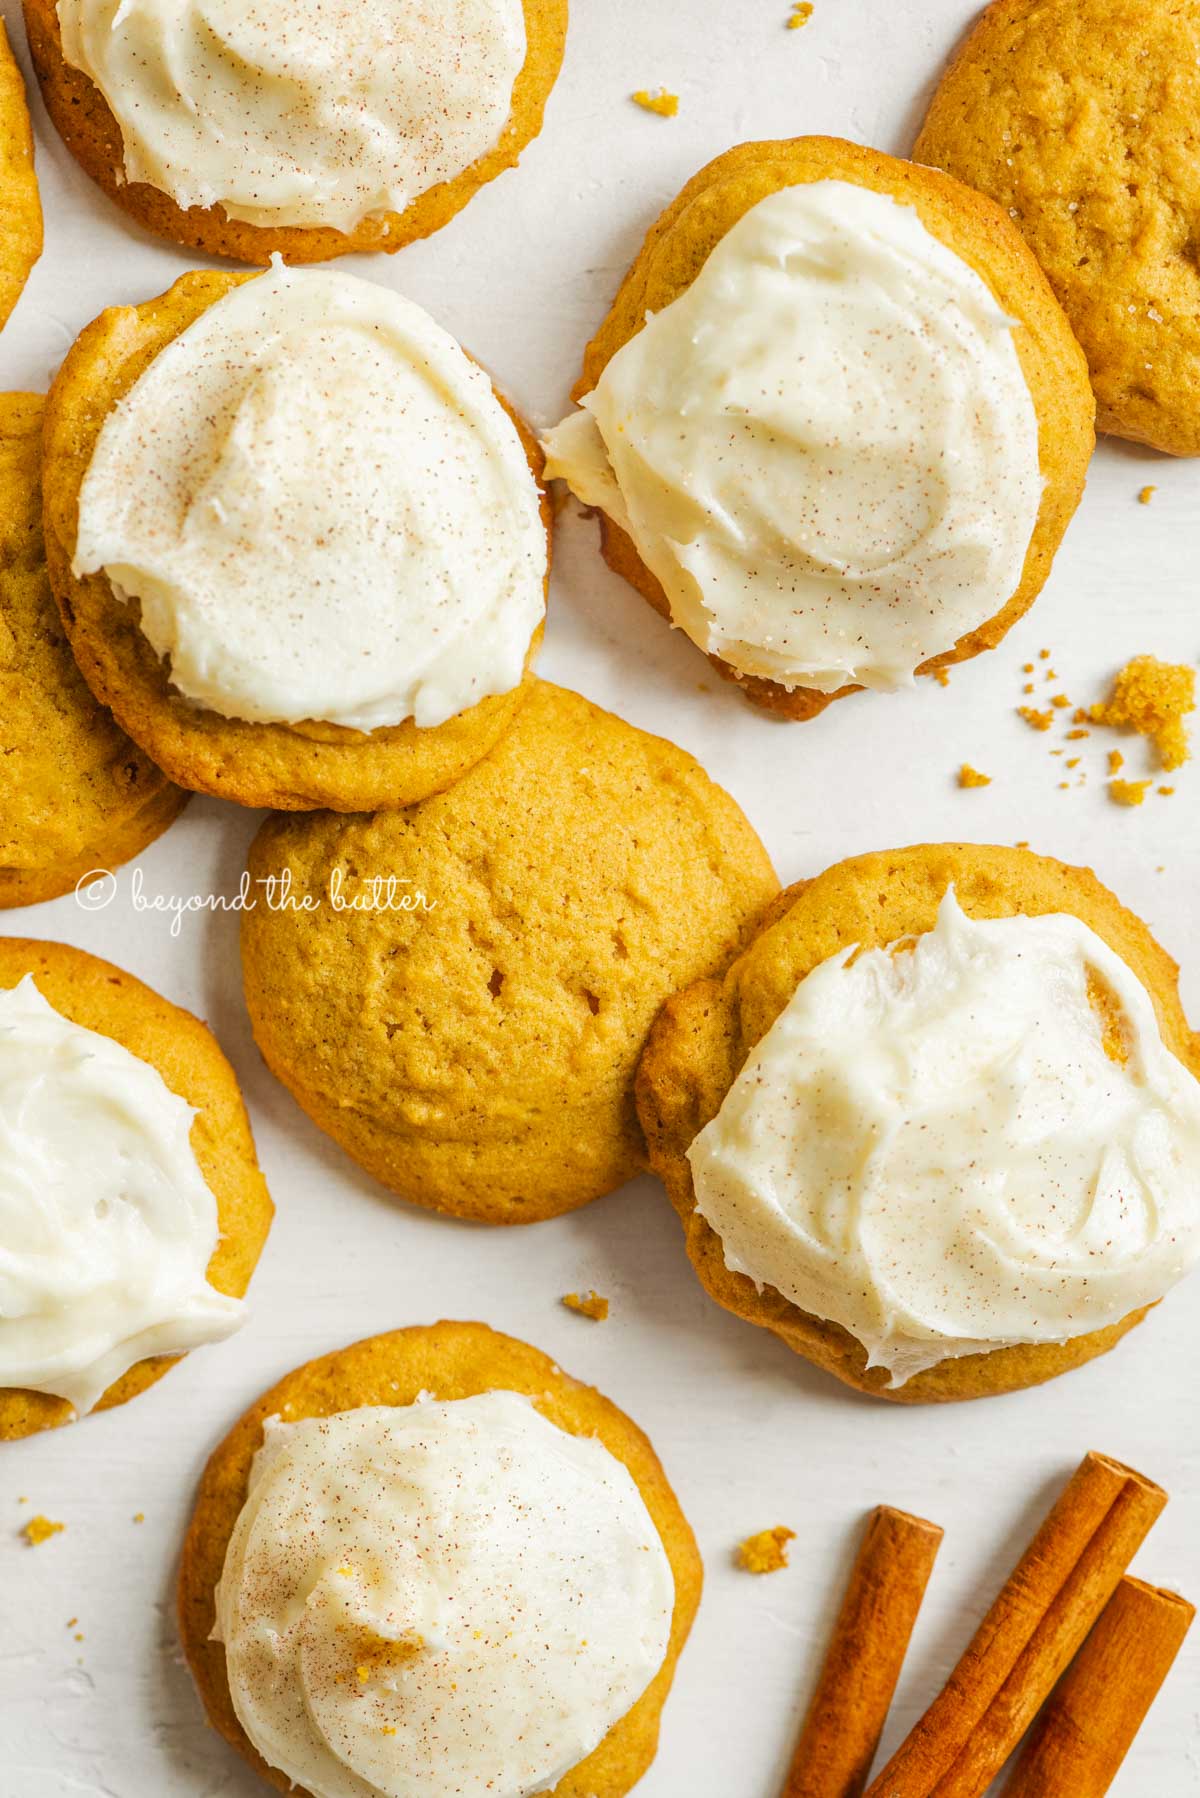 Plain and cream cheese frosted pumpkin cinnamon cookies with cinnamon sticks randomly place bottom right on a white background | All Images © Beyond the Butter™